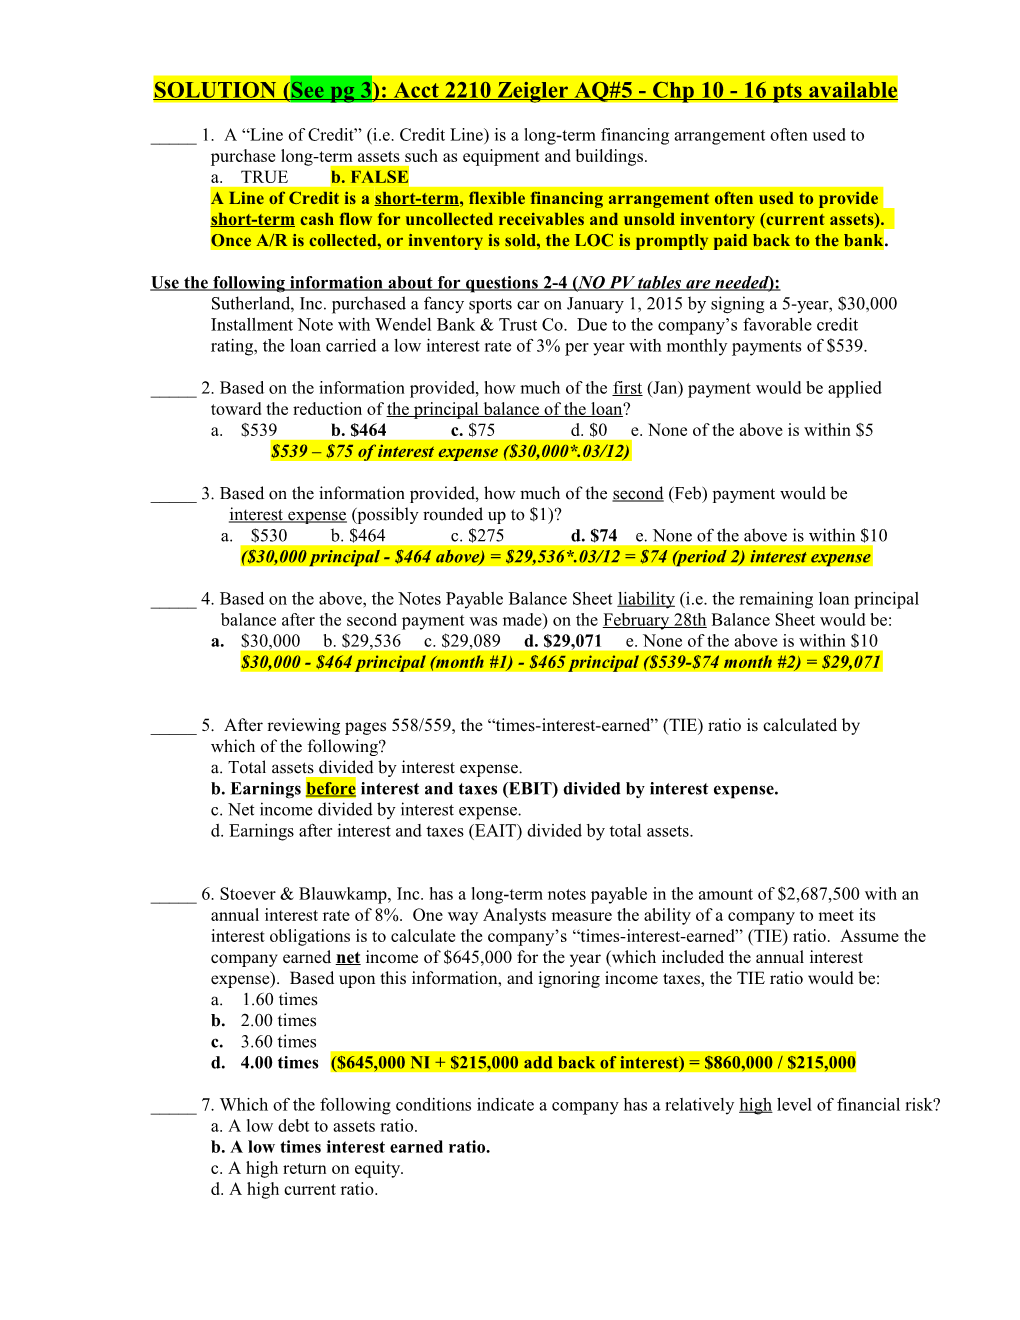 SOLUTION (See Pg 3): Acct 2210 Zeigler AQ#5 - Chp 10 -16 Pts Available